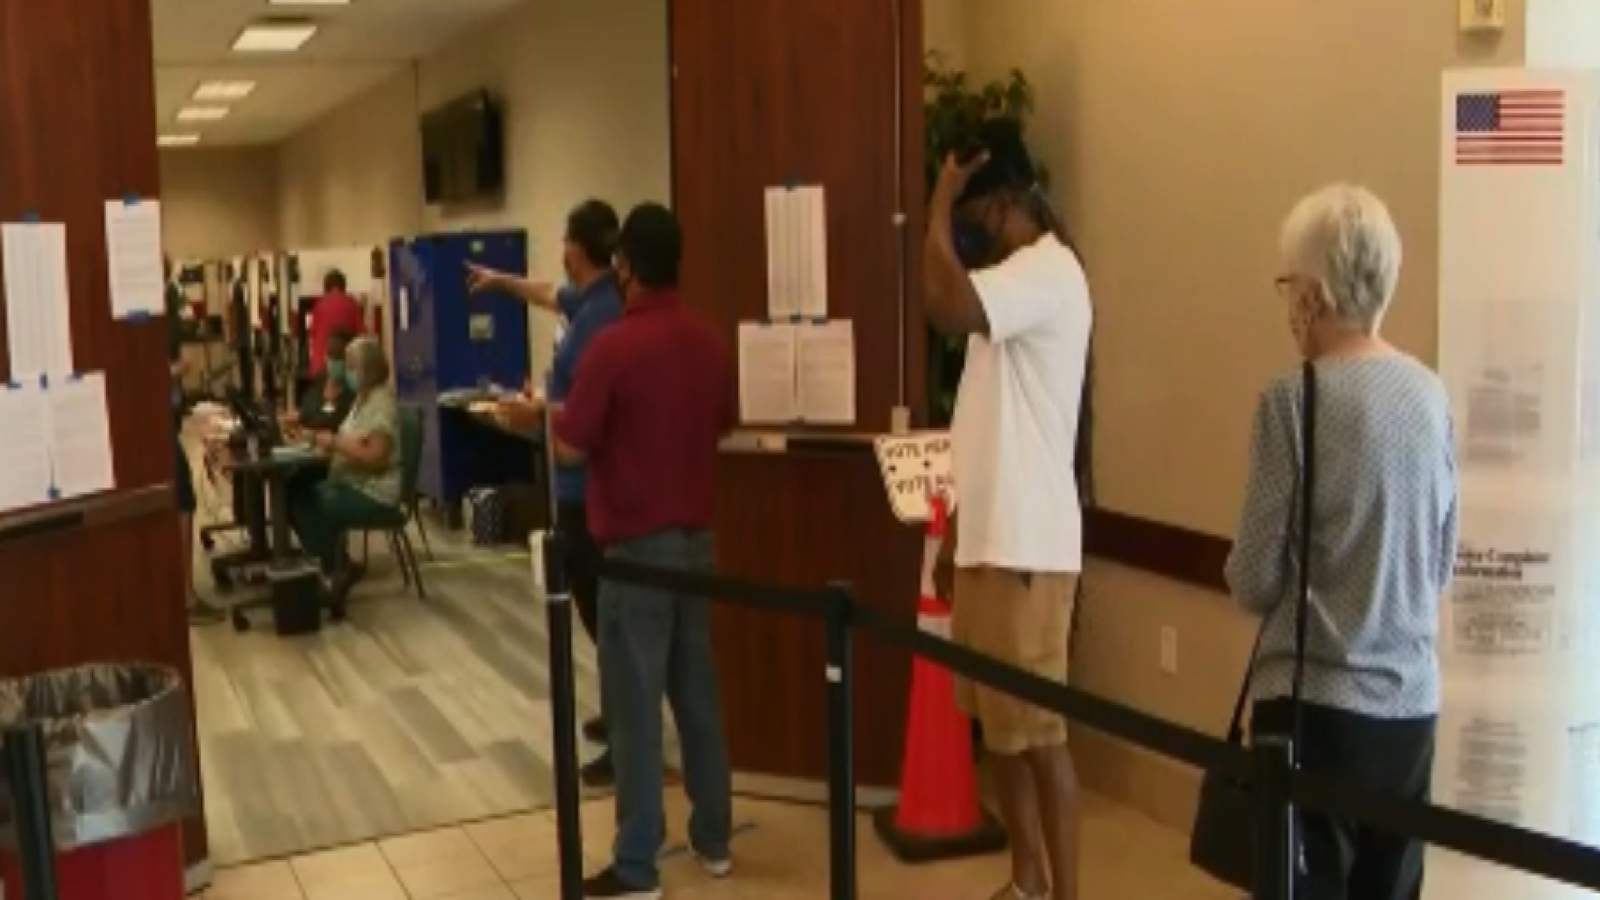 Fort Bend County resolves early voting issues, county judge says